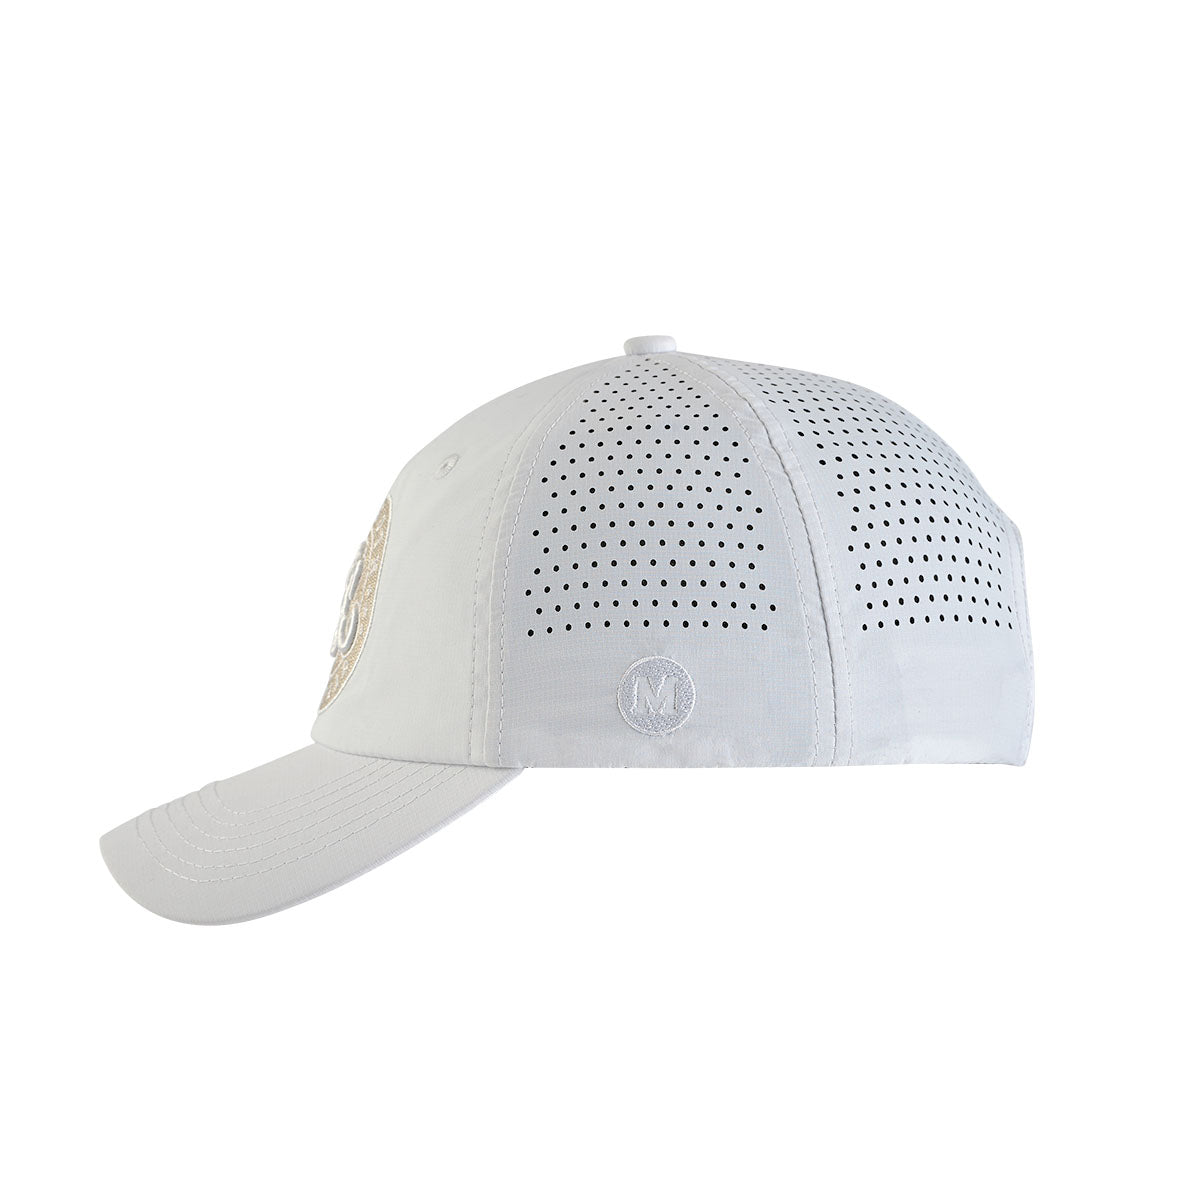 White Snapback - Classic Performance Finest Headwear Mammoth at Its 